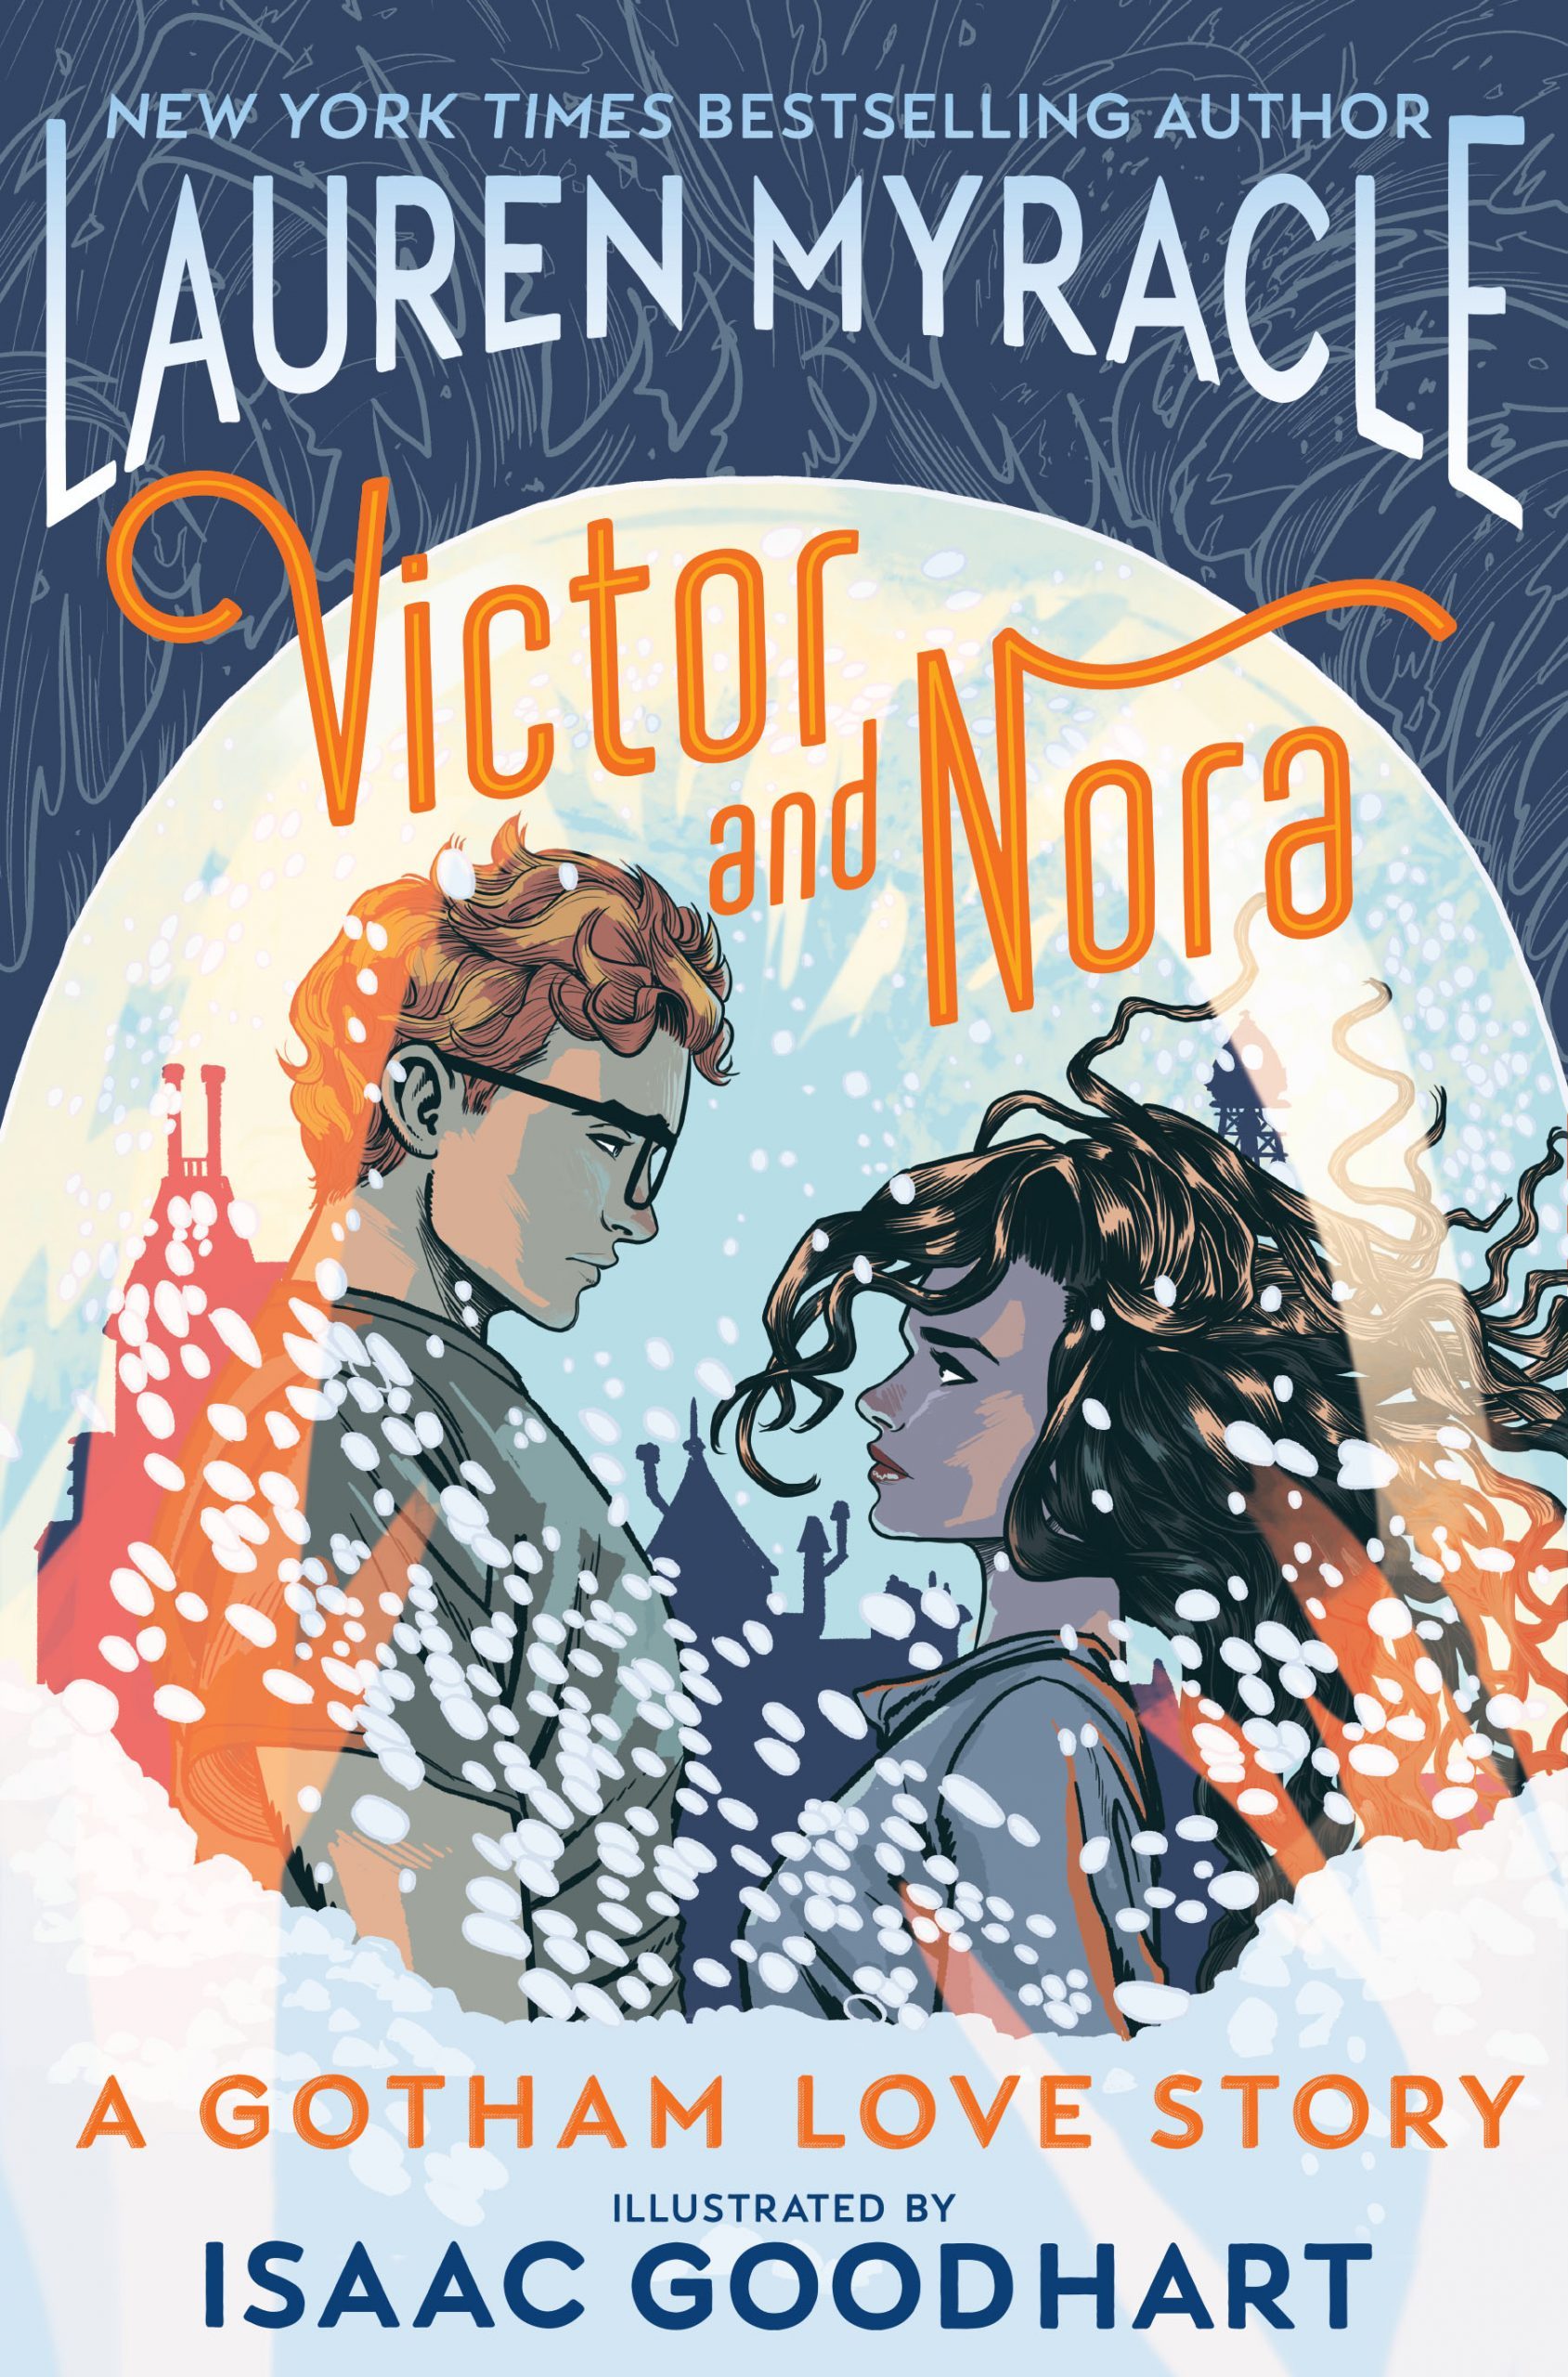 Victor And Nora By Lauren Myracle Release Date? 2020 Sequential Art Releases